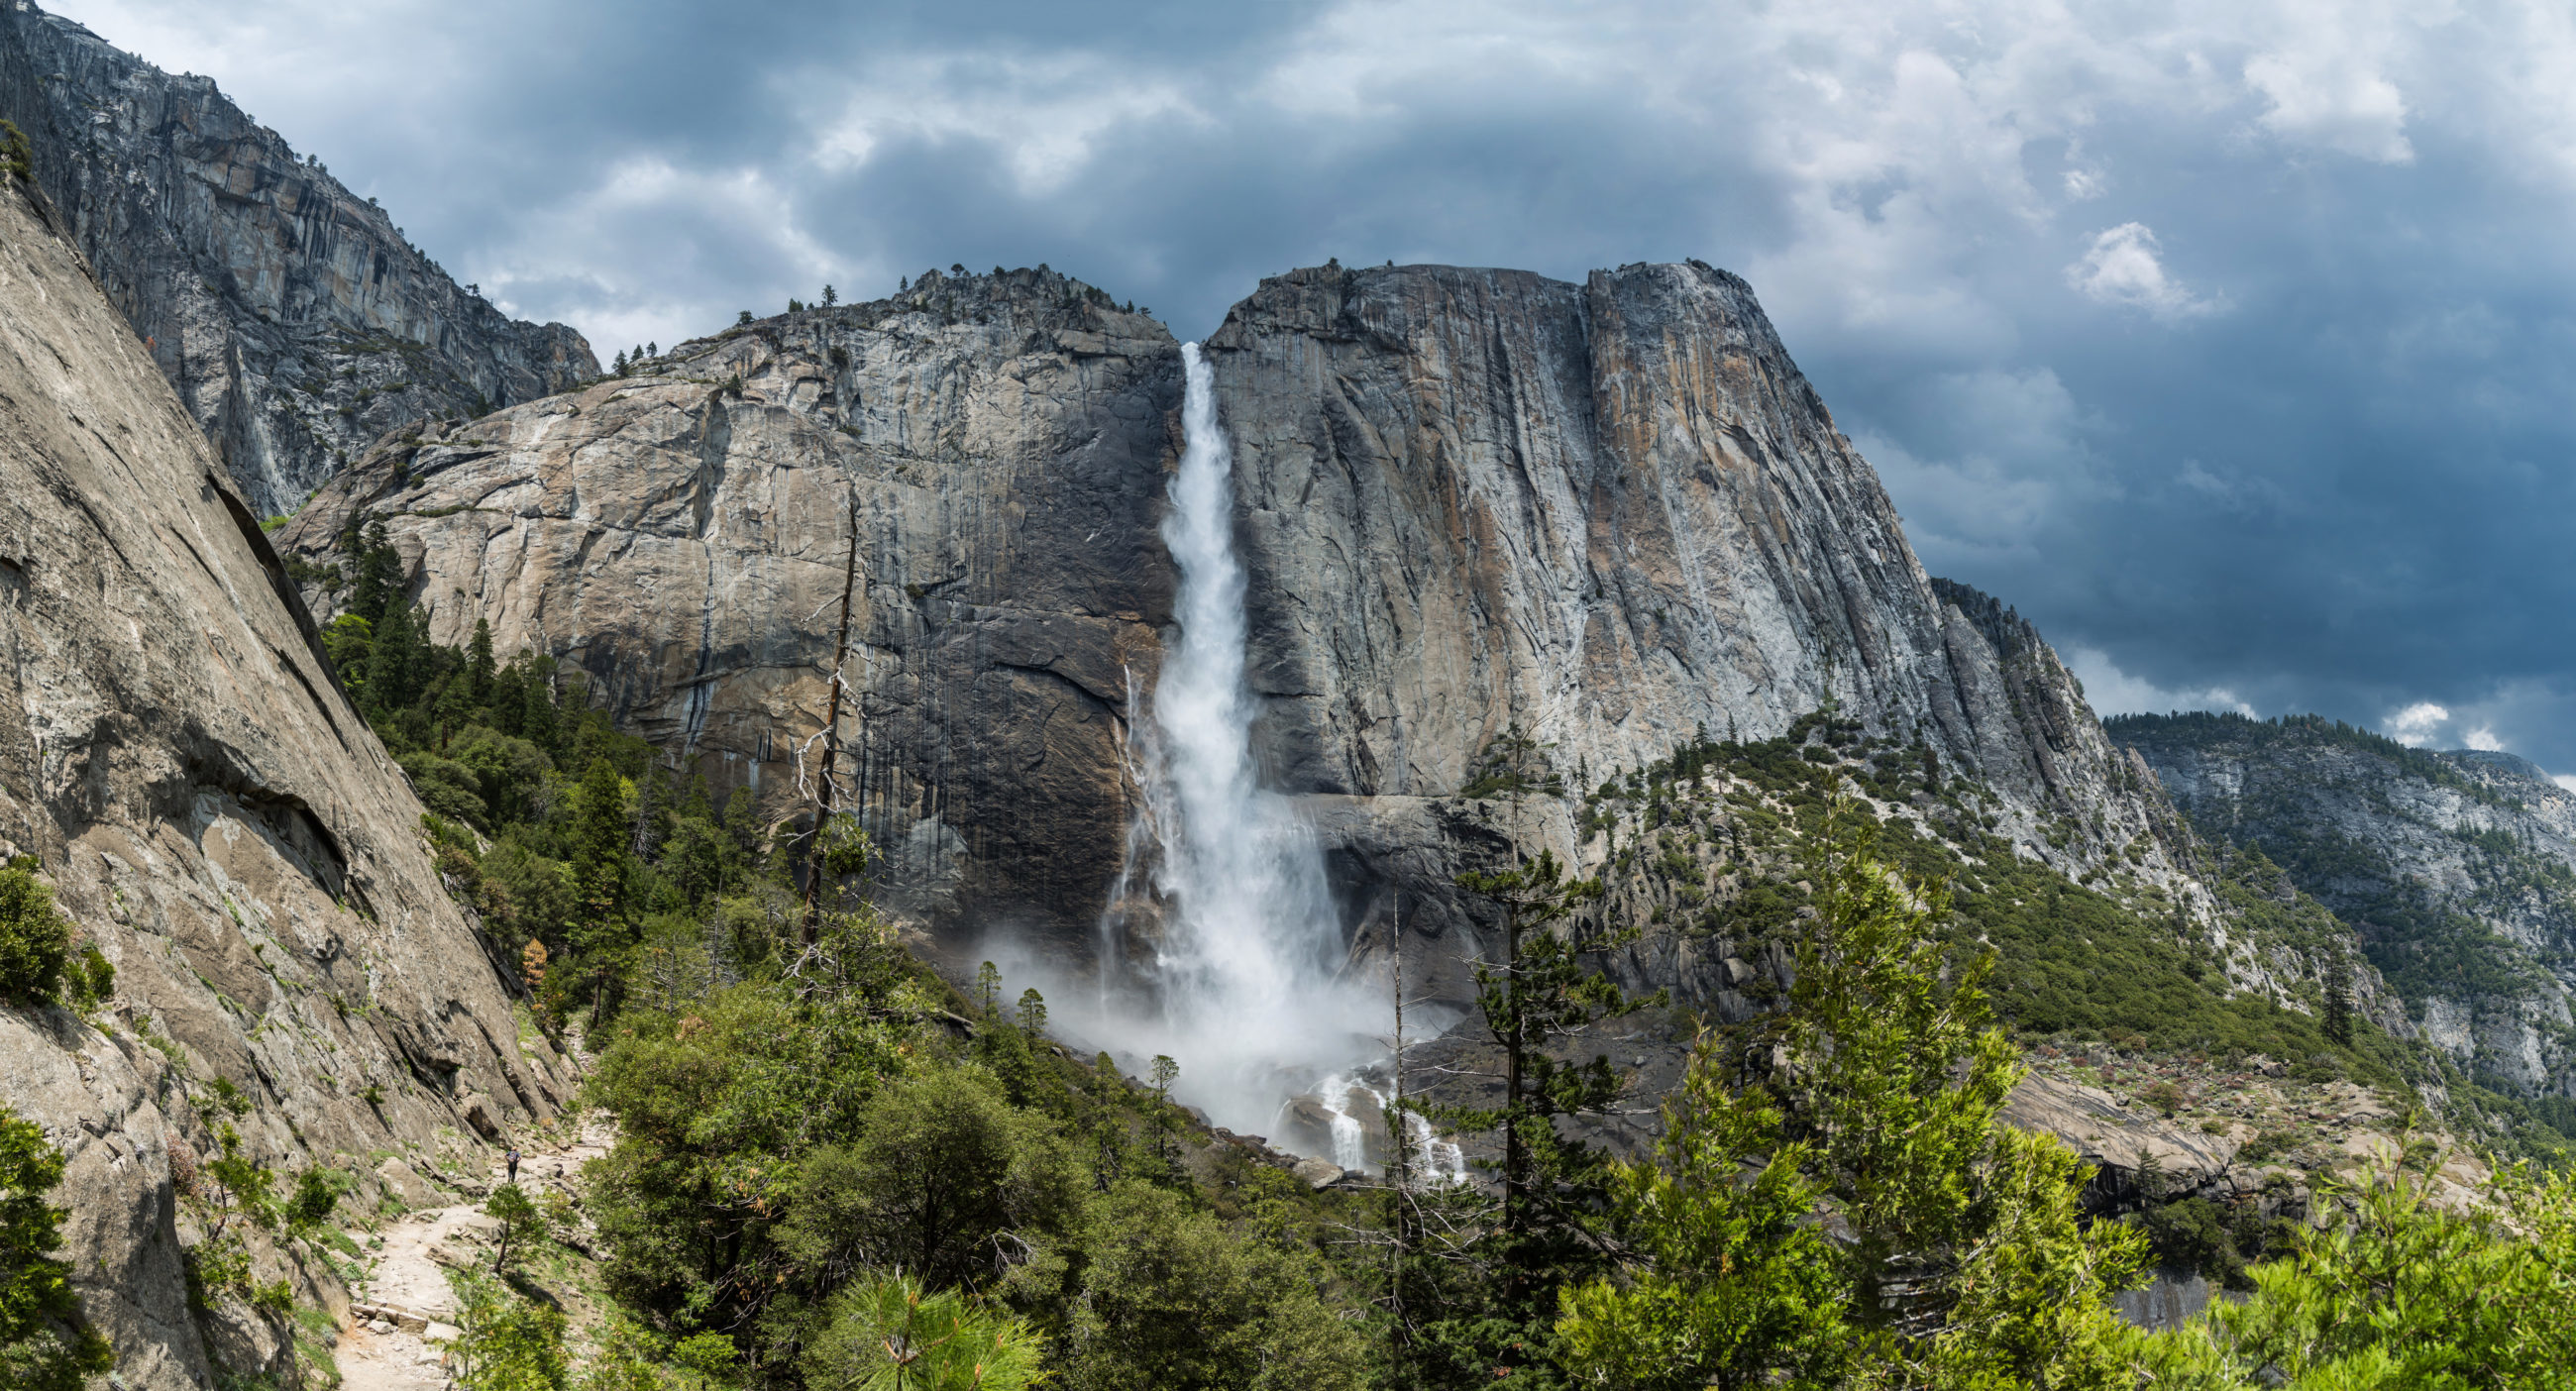 Yosemite Falls was just one of the sites that Obama visited on his recent National Parks promotion trip.